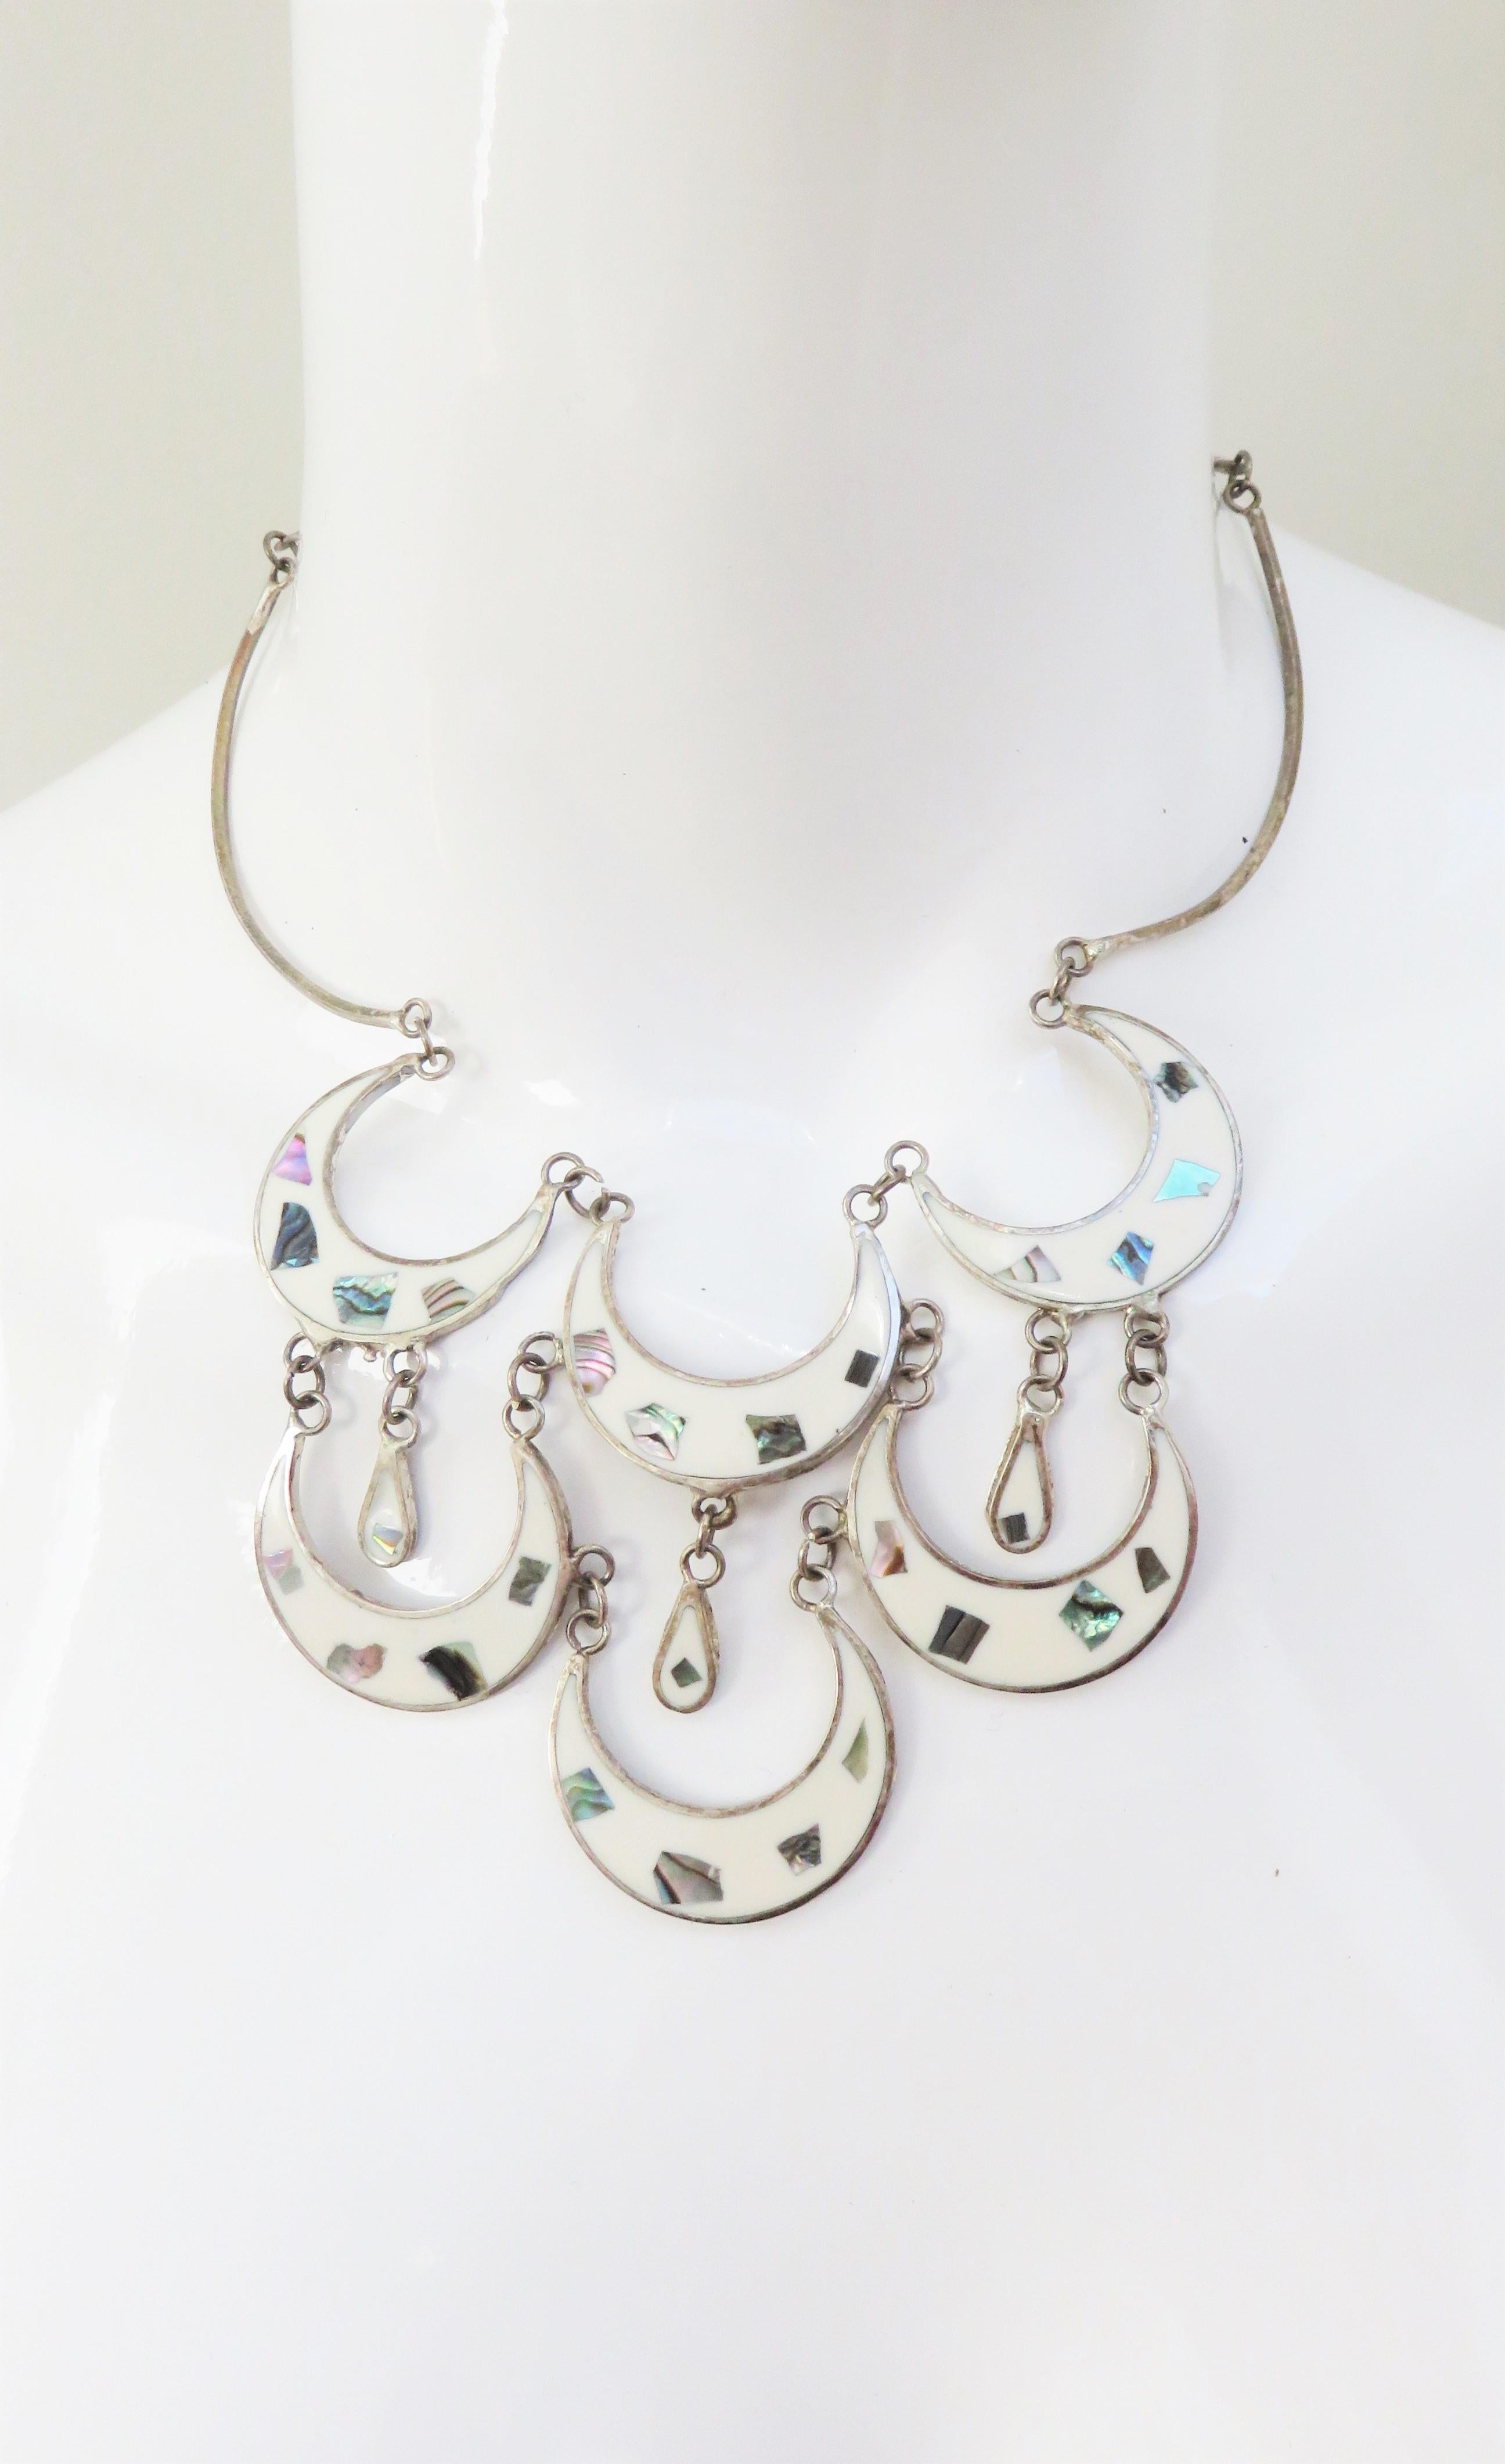 Mexican Abalone Inlaid Silver Necklace and Pierced Earrings Set In Good Condition For Sale In Water Mill, NY